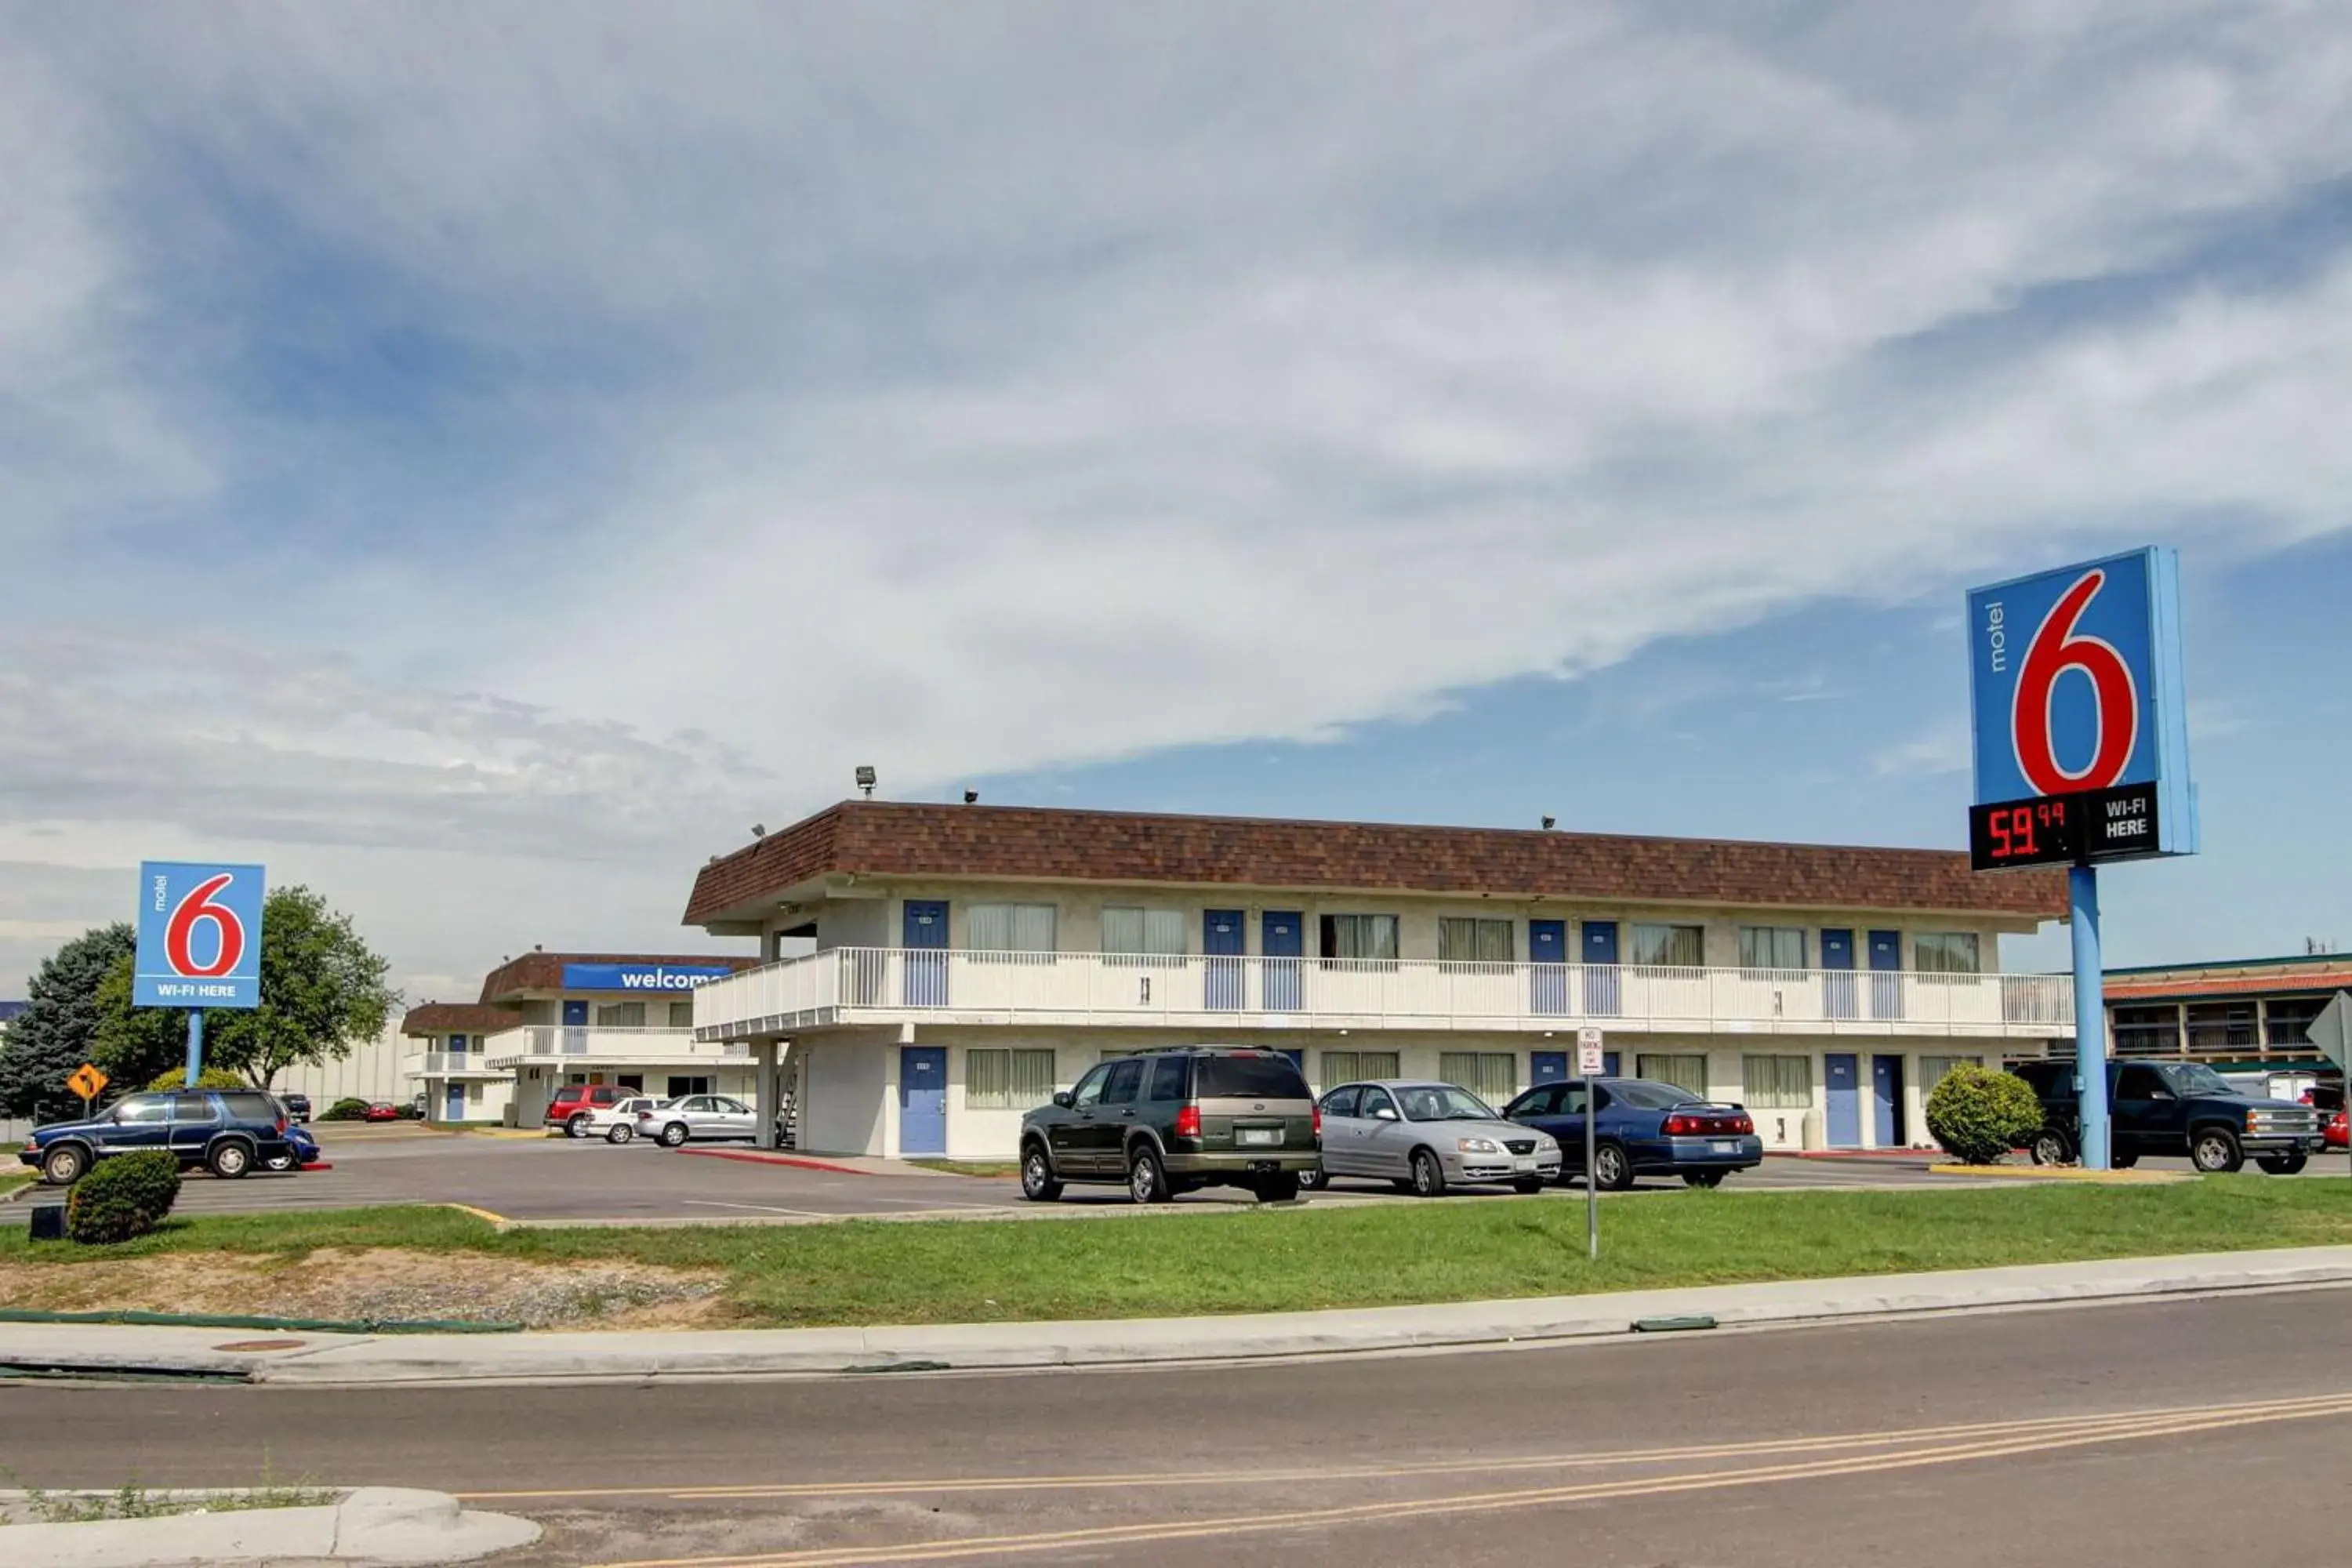 Property Building in Motel 6-Denver, CO - Airport